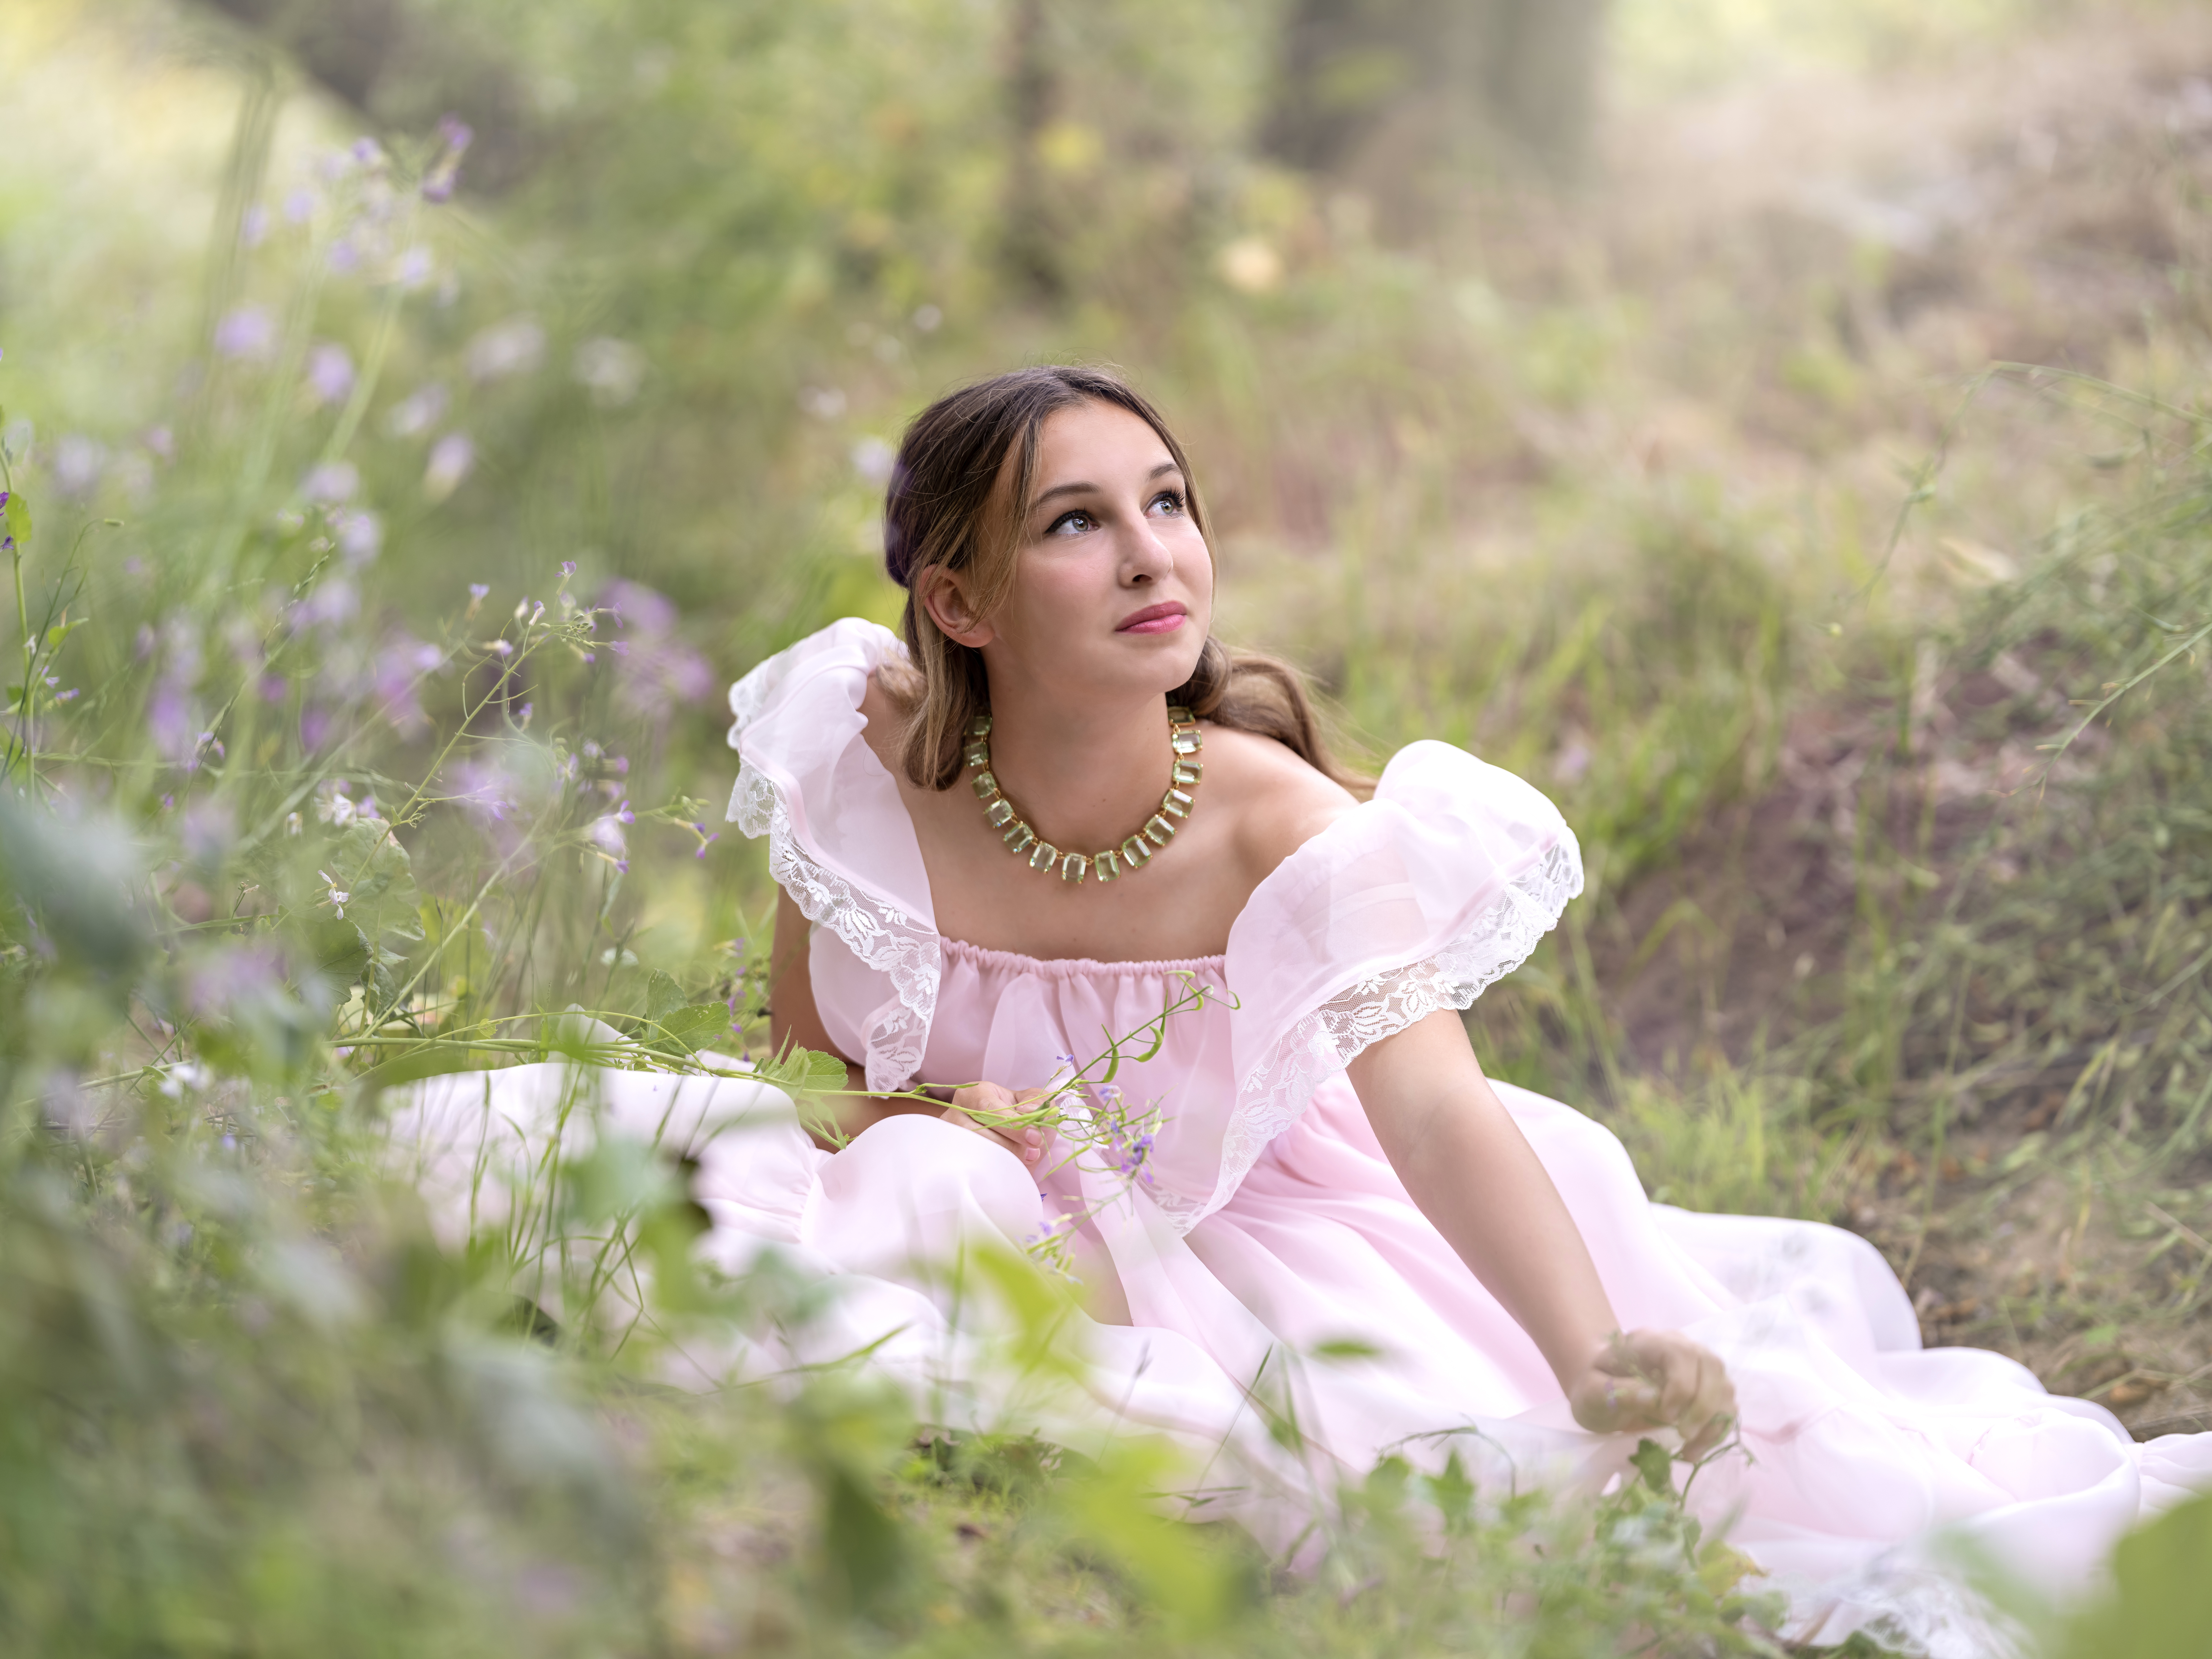 Young teenage girl sitting in a field of brush in a pink off-the-shoulder oraganza dress picking a flower from her surroundings while staring off into the sky.